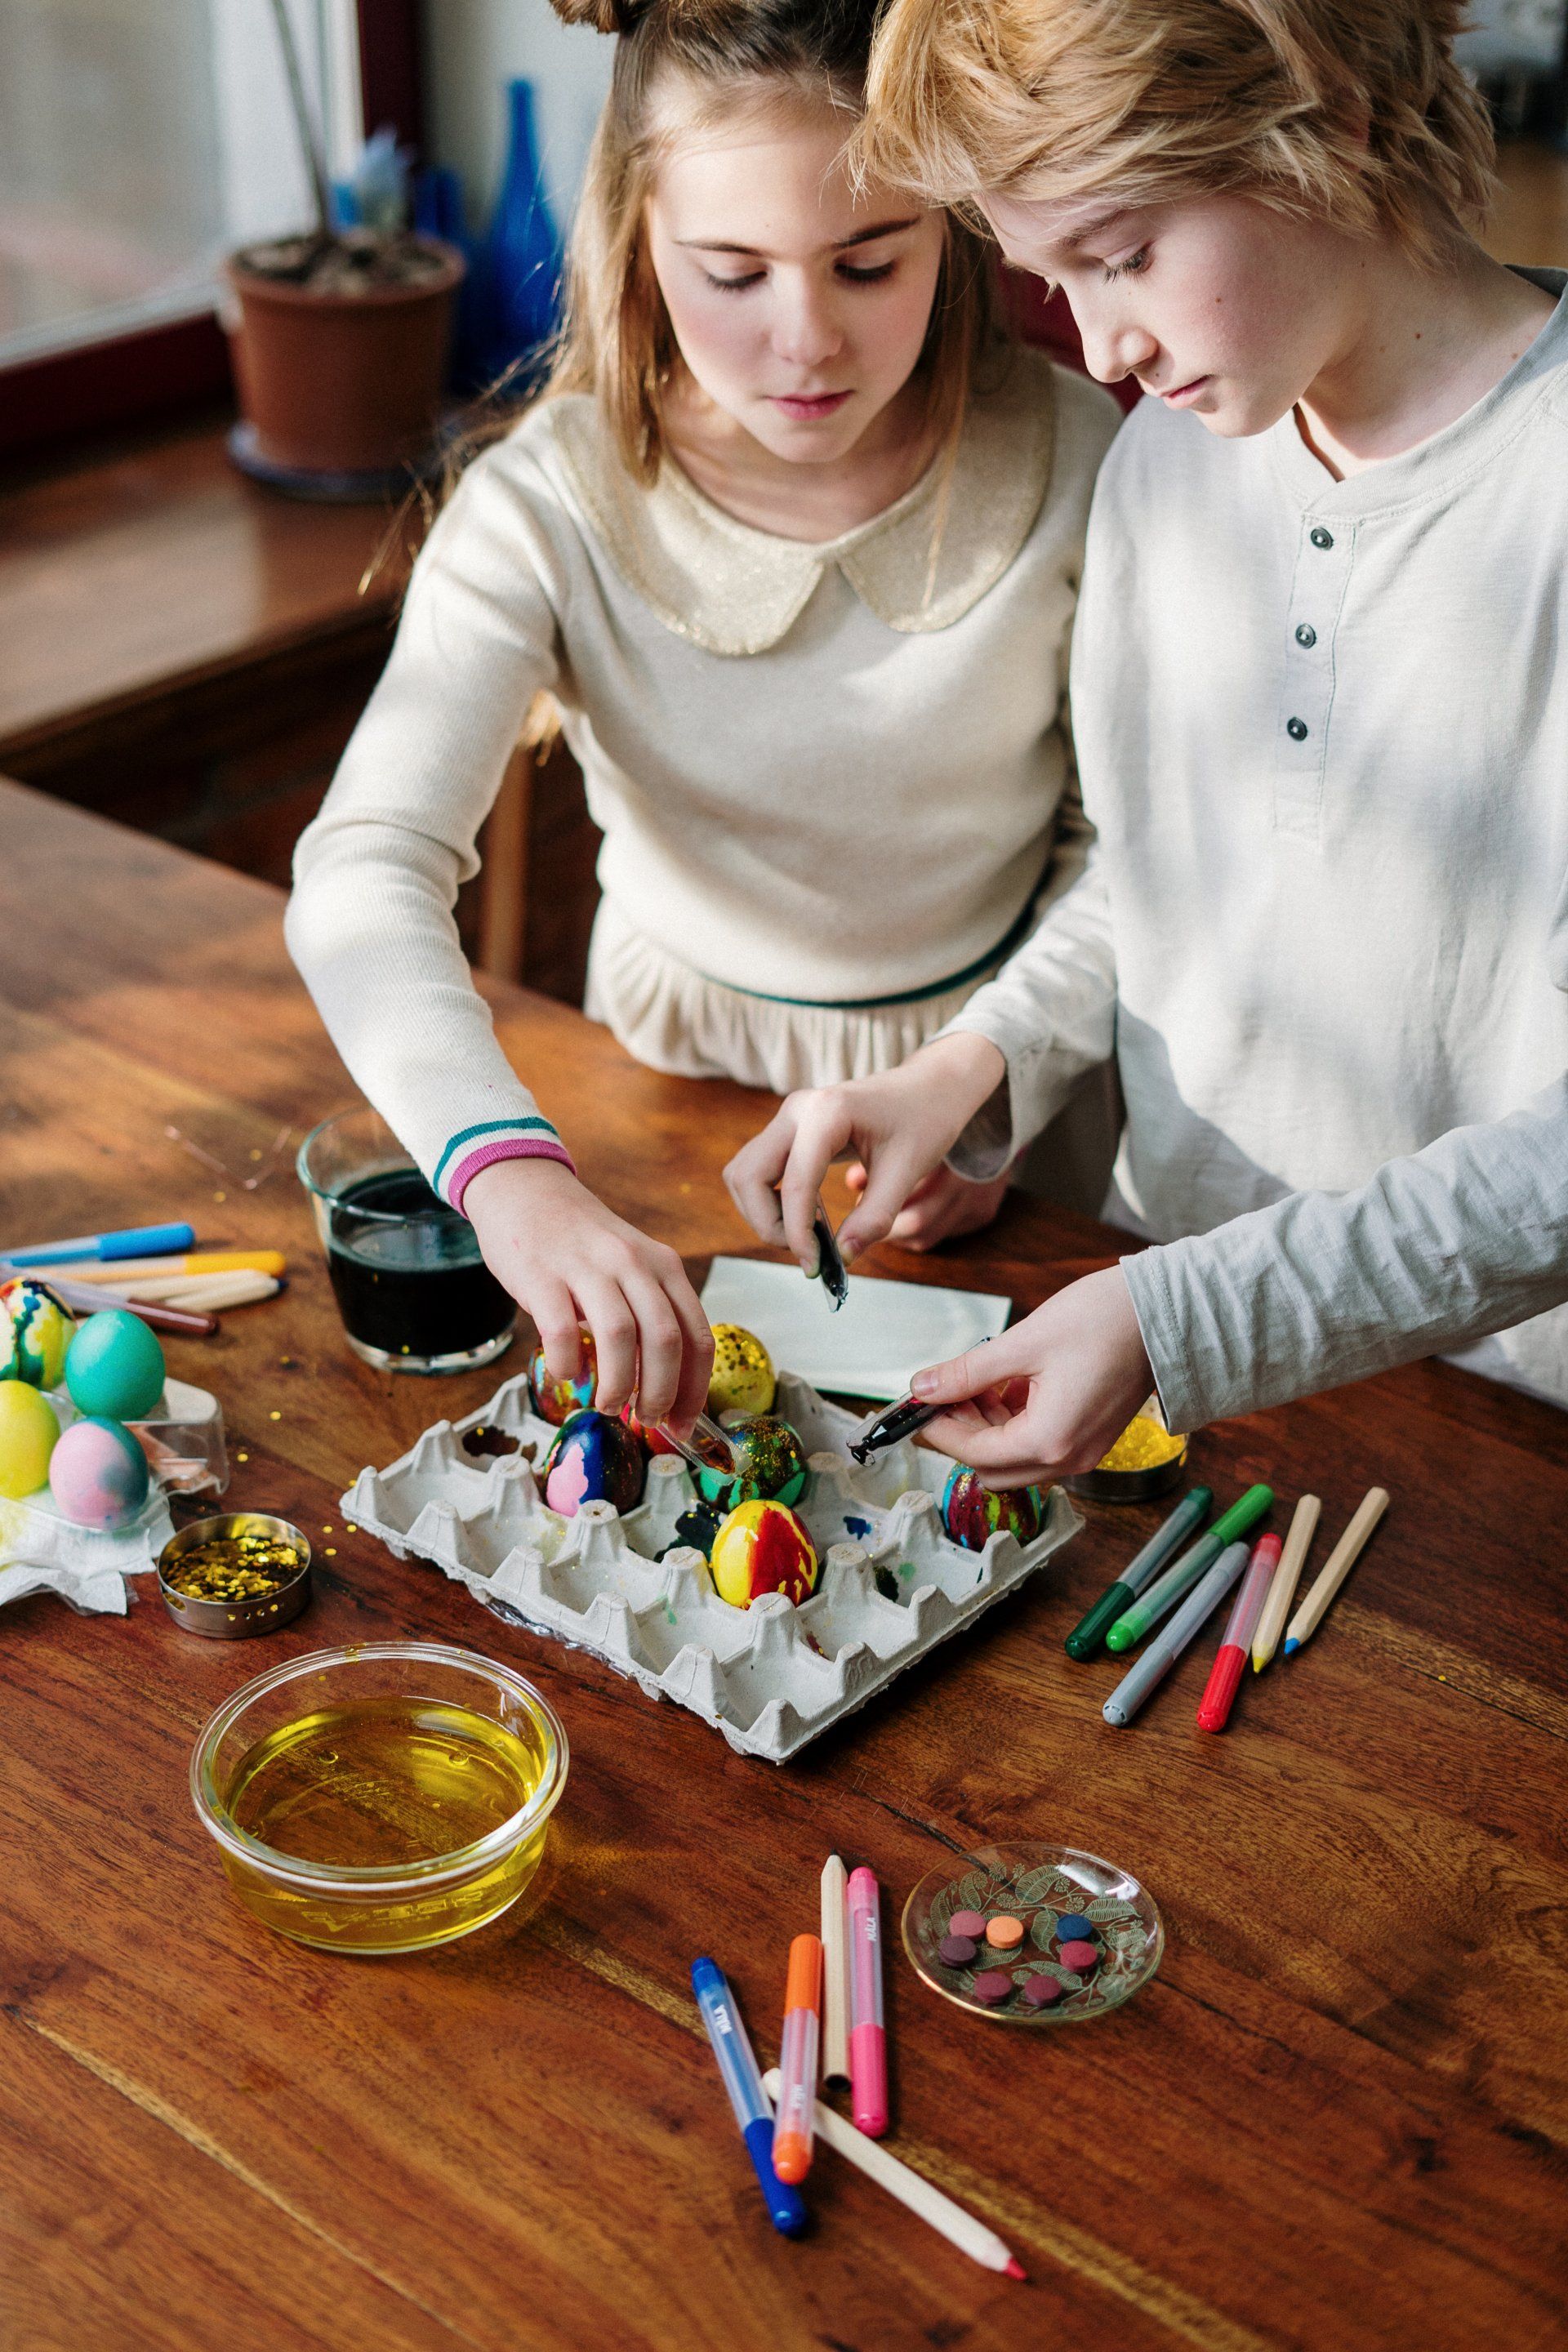 An image of two children painting eggs as part of an activity. The focal point of the image is the egg decoration activity.